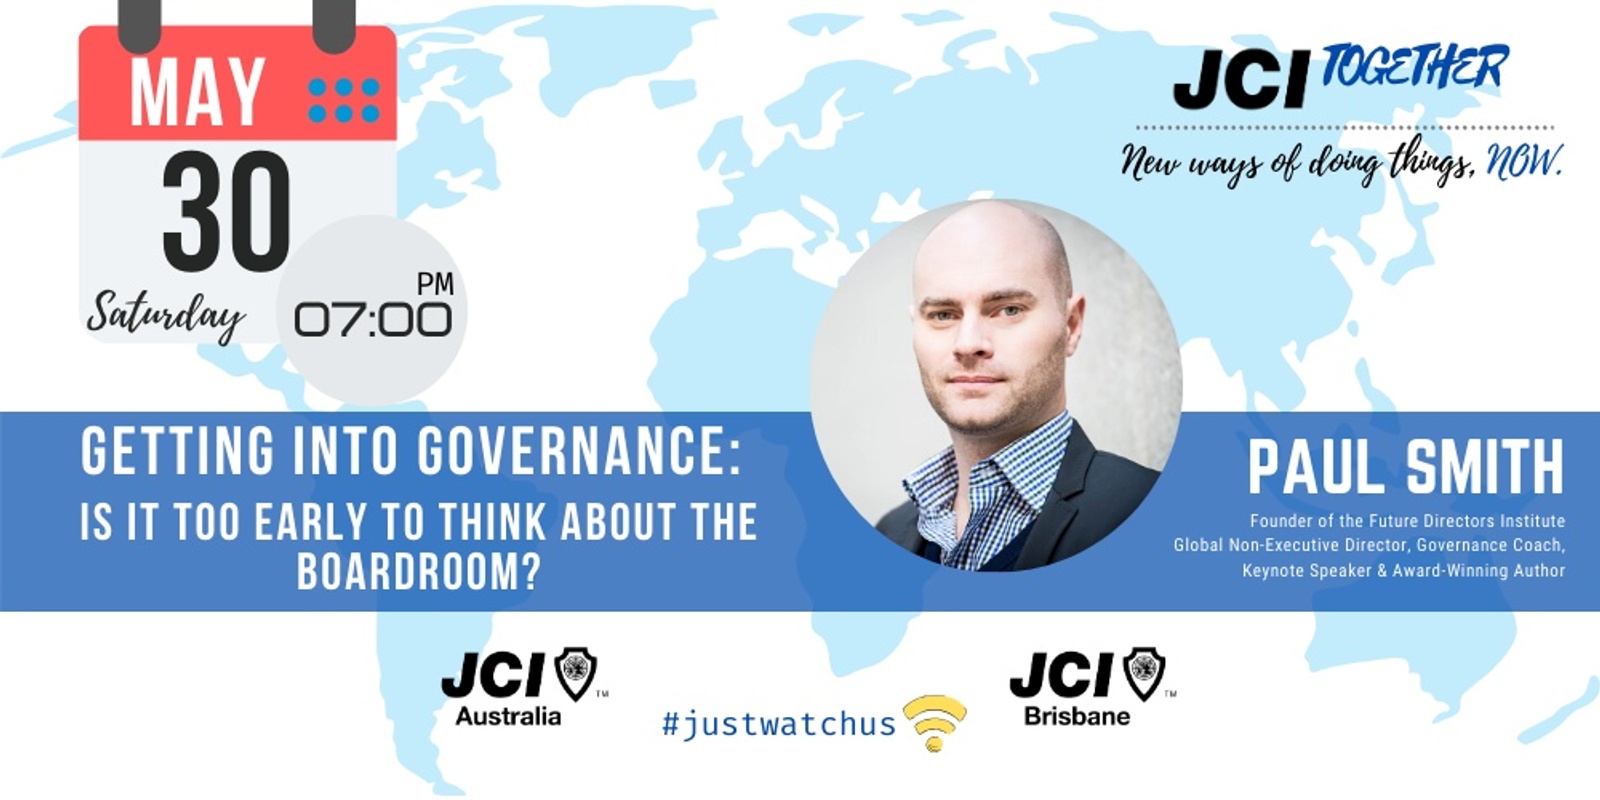 Banner image for JCI TOGETHER series: Paul Smith  - Getting into Governance: Is it too early to think about the boardroom?